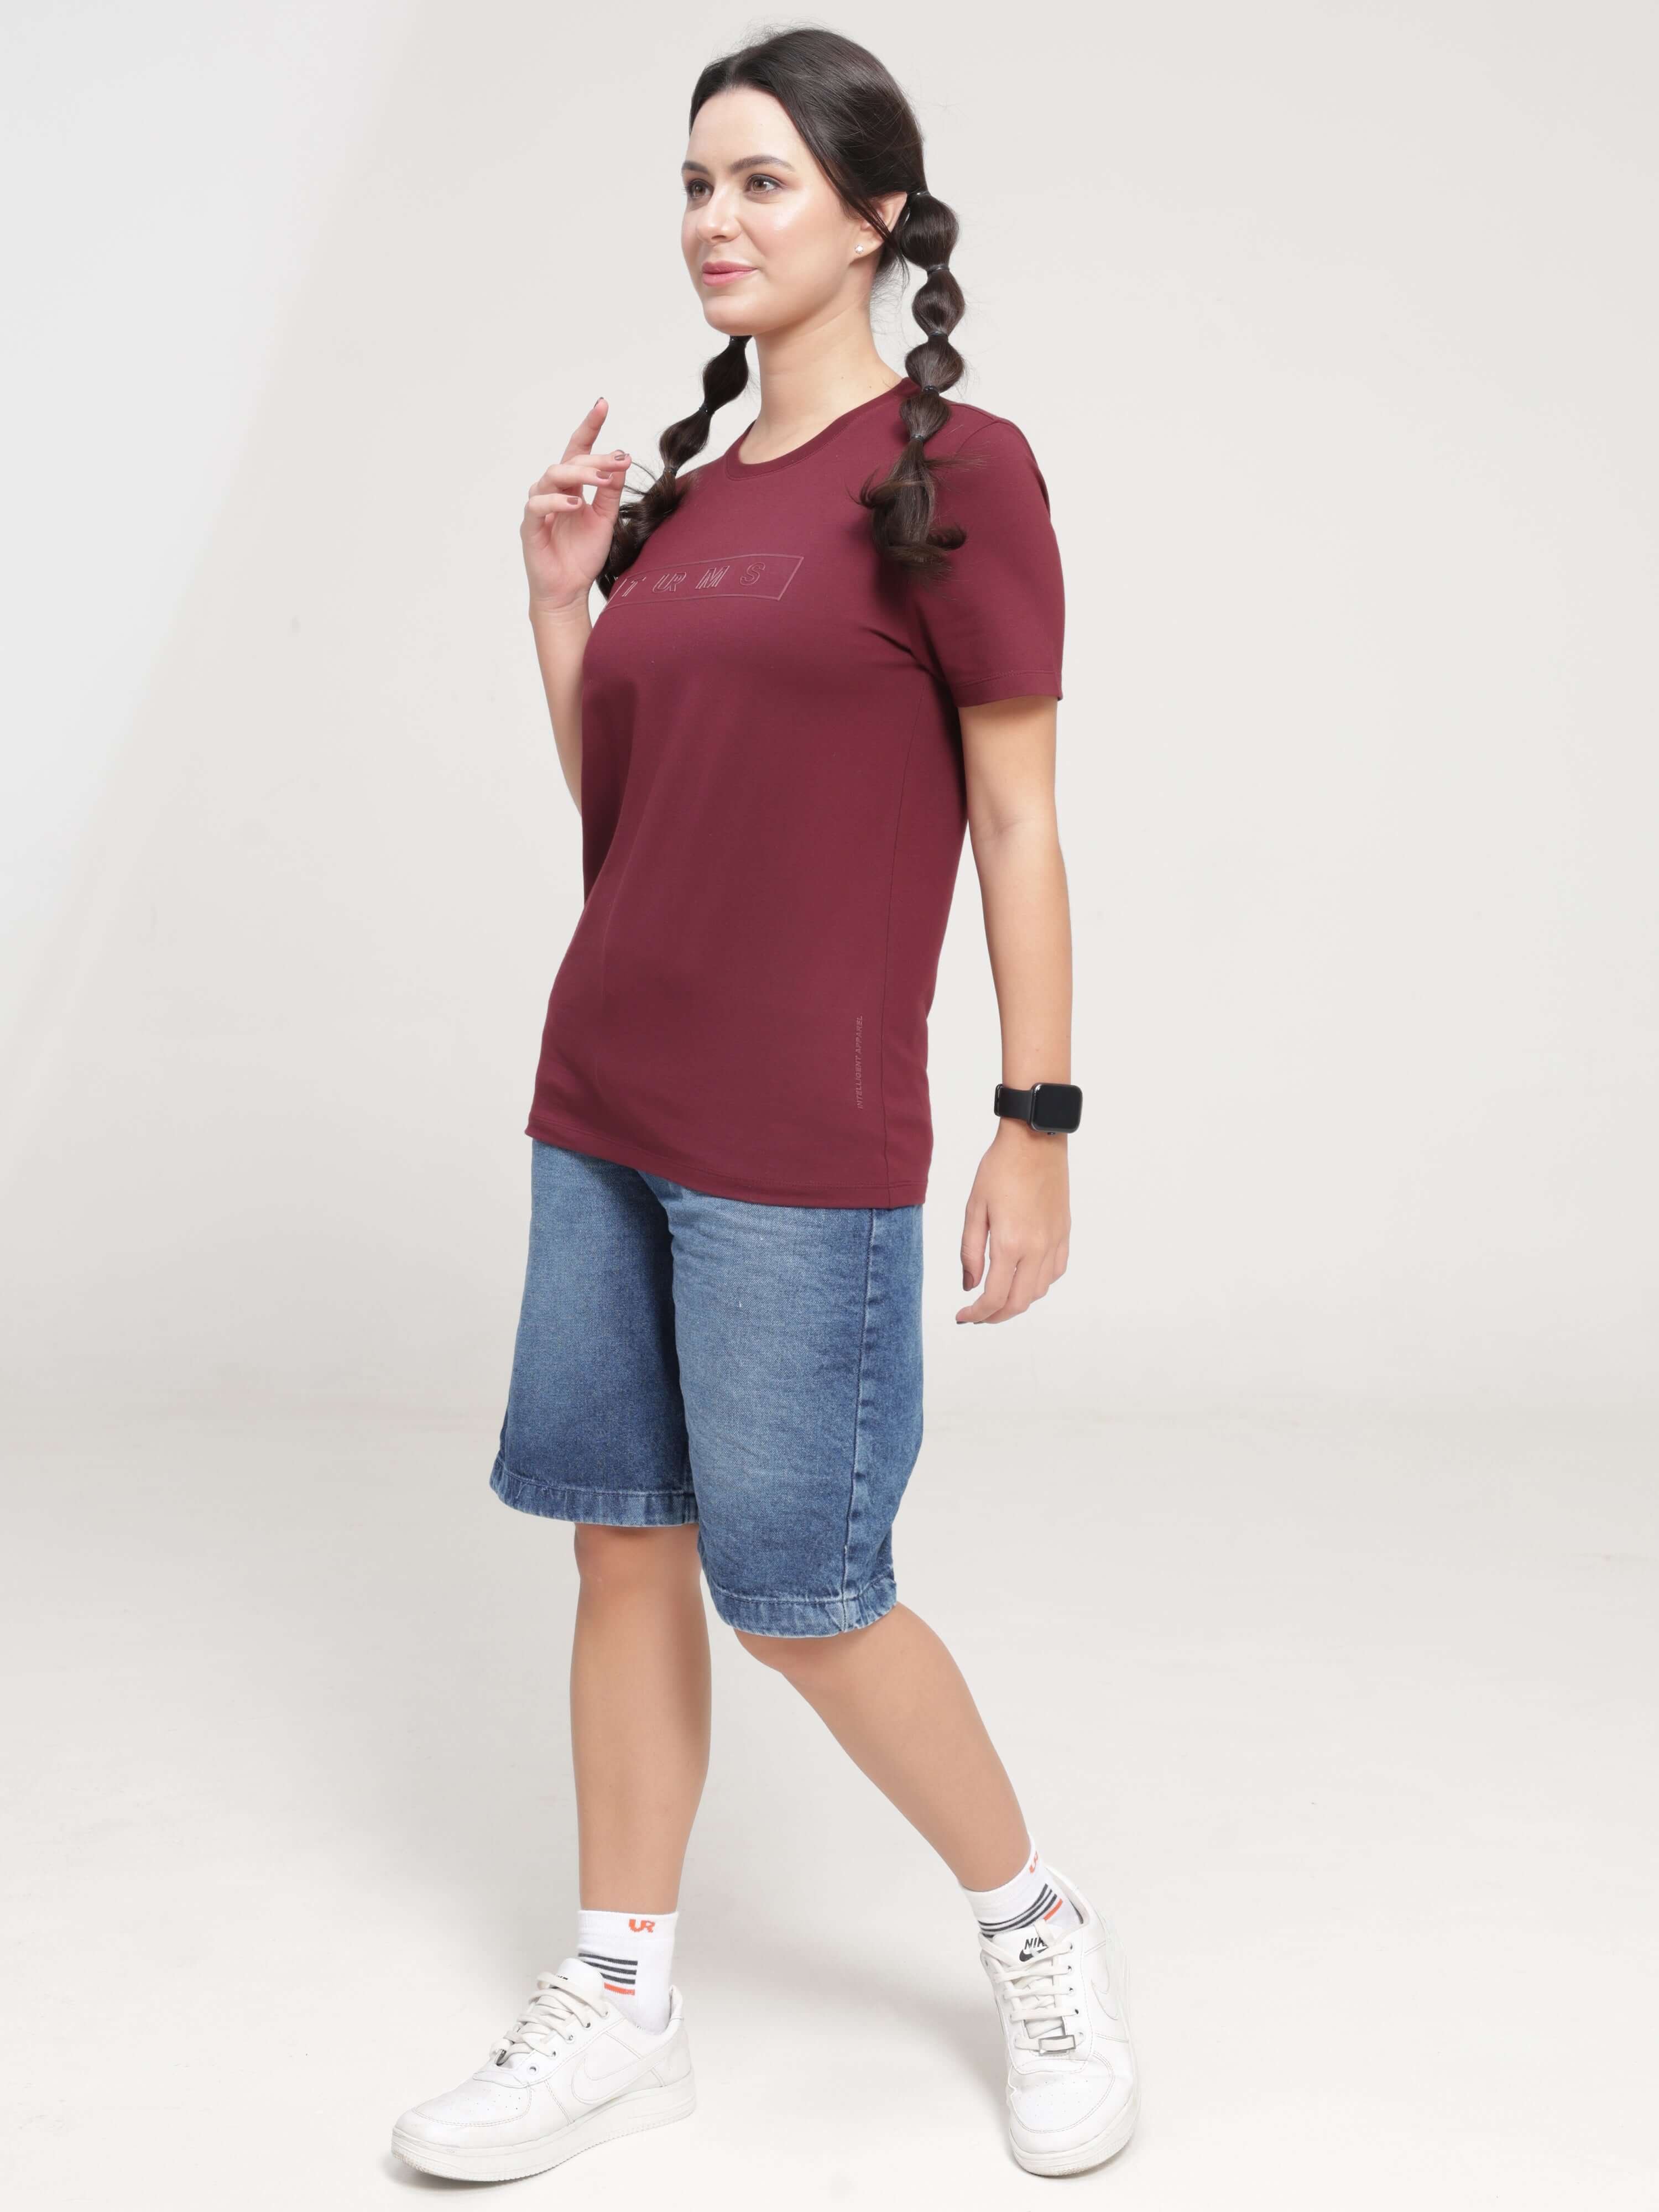 Woman in Burgundy Elite anti-stain, anti-odor Turms T-shirt with tailored fit, round neck, and stretchable fabric, paired with denim shorts.